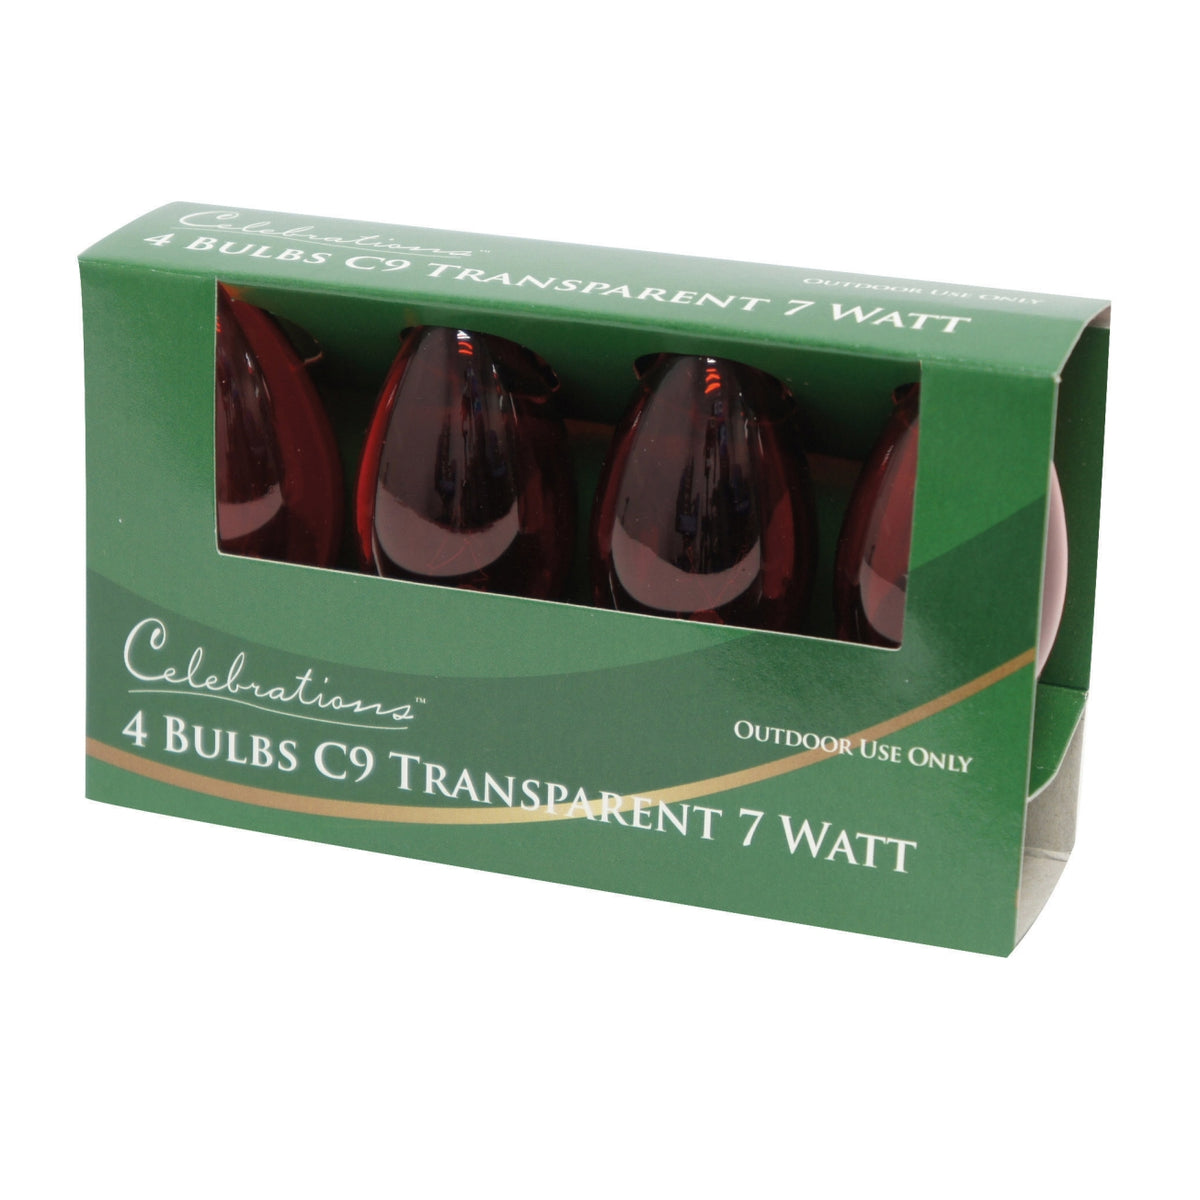 Celebrations UTRUL511 C9 Replacement Bulbs, 7 W, Transparent, Red